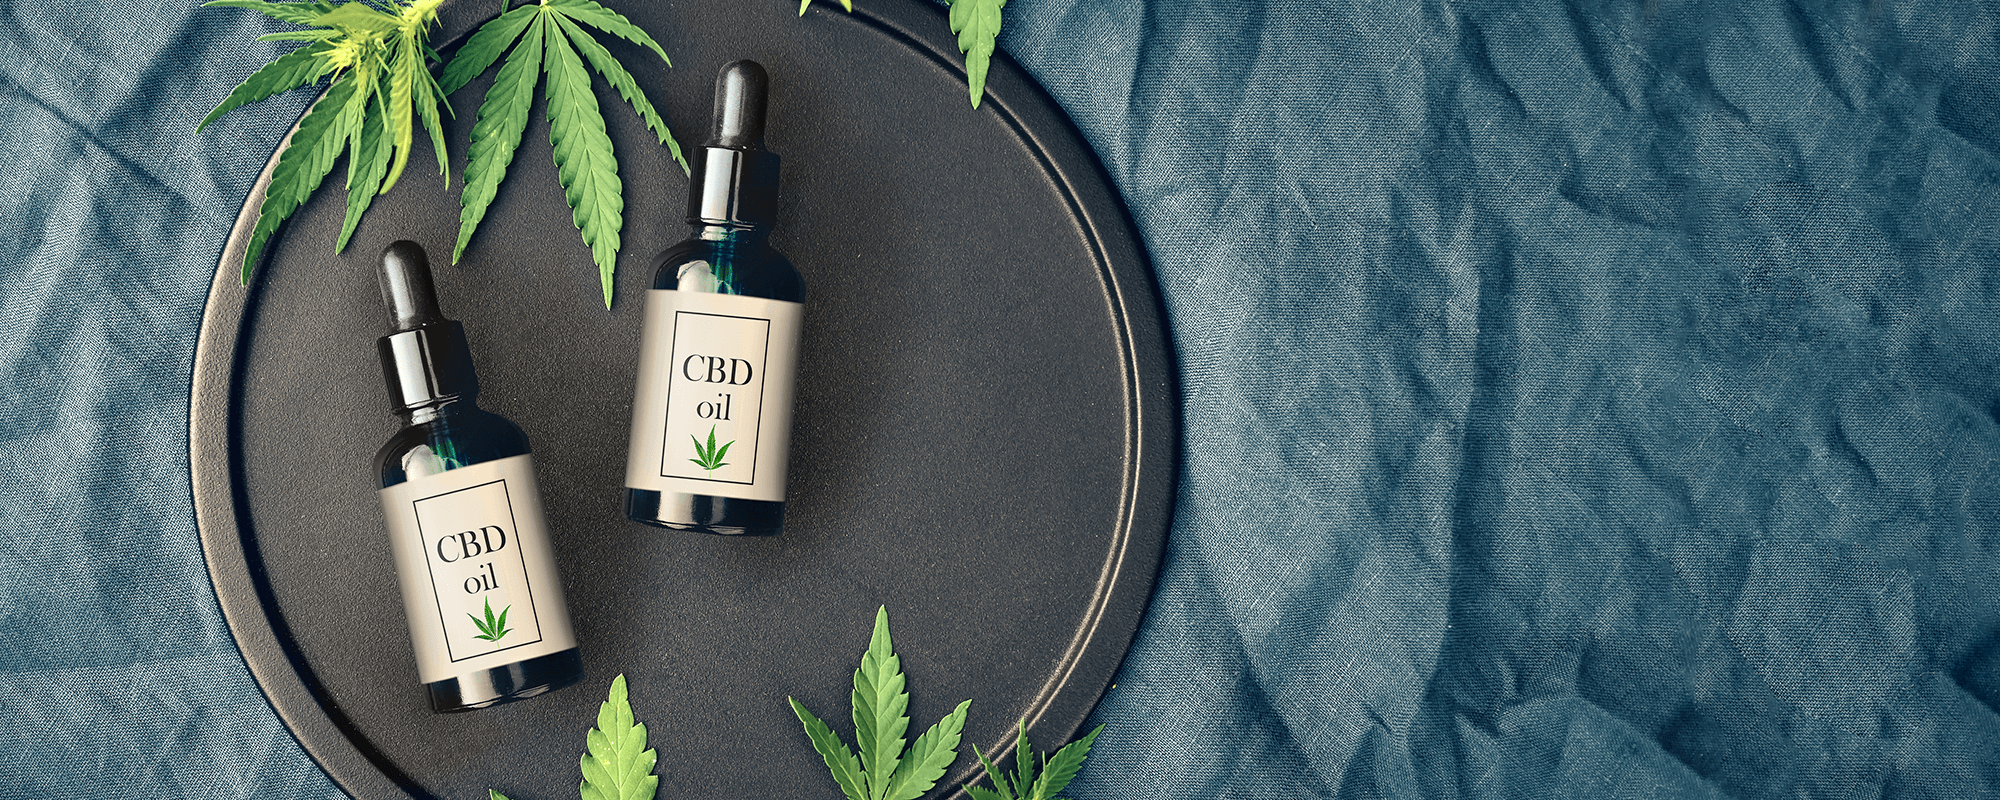 Can CBD Oil Affect Your BJJ Performance?